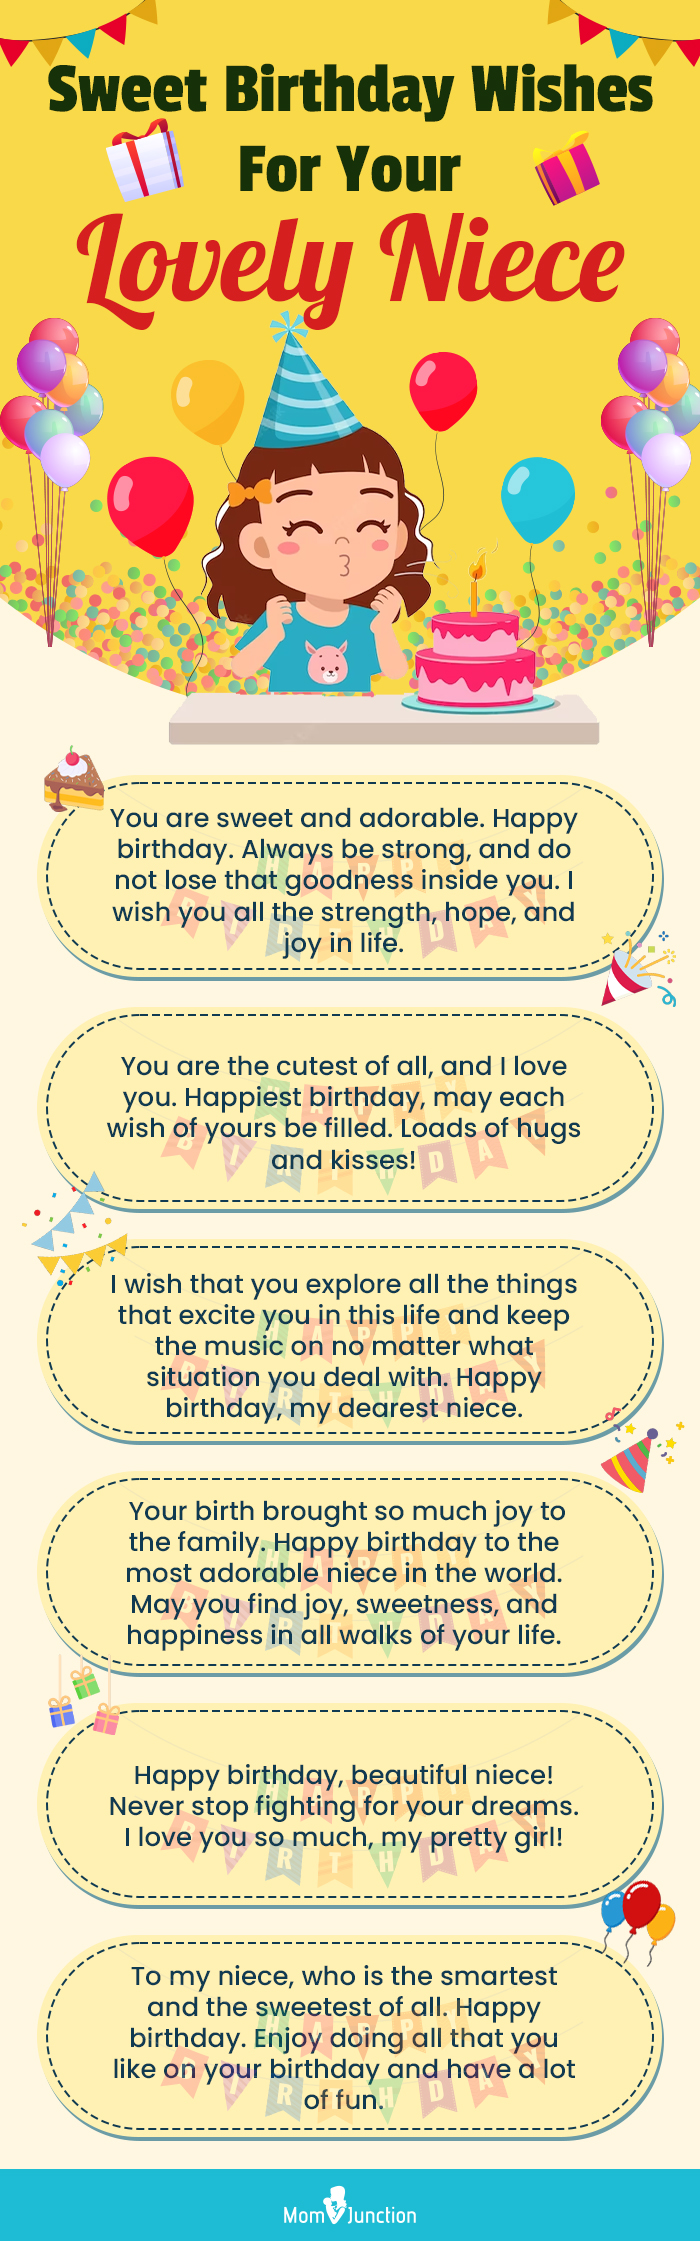 sweet birthday wishes for your lovely niece (infographic)